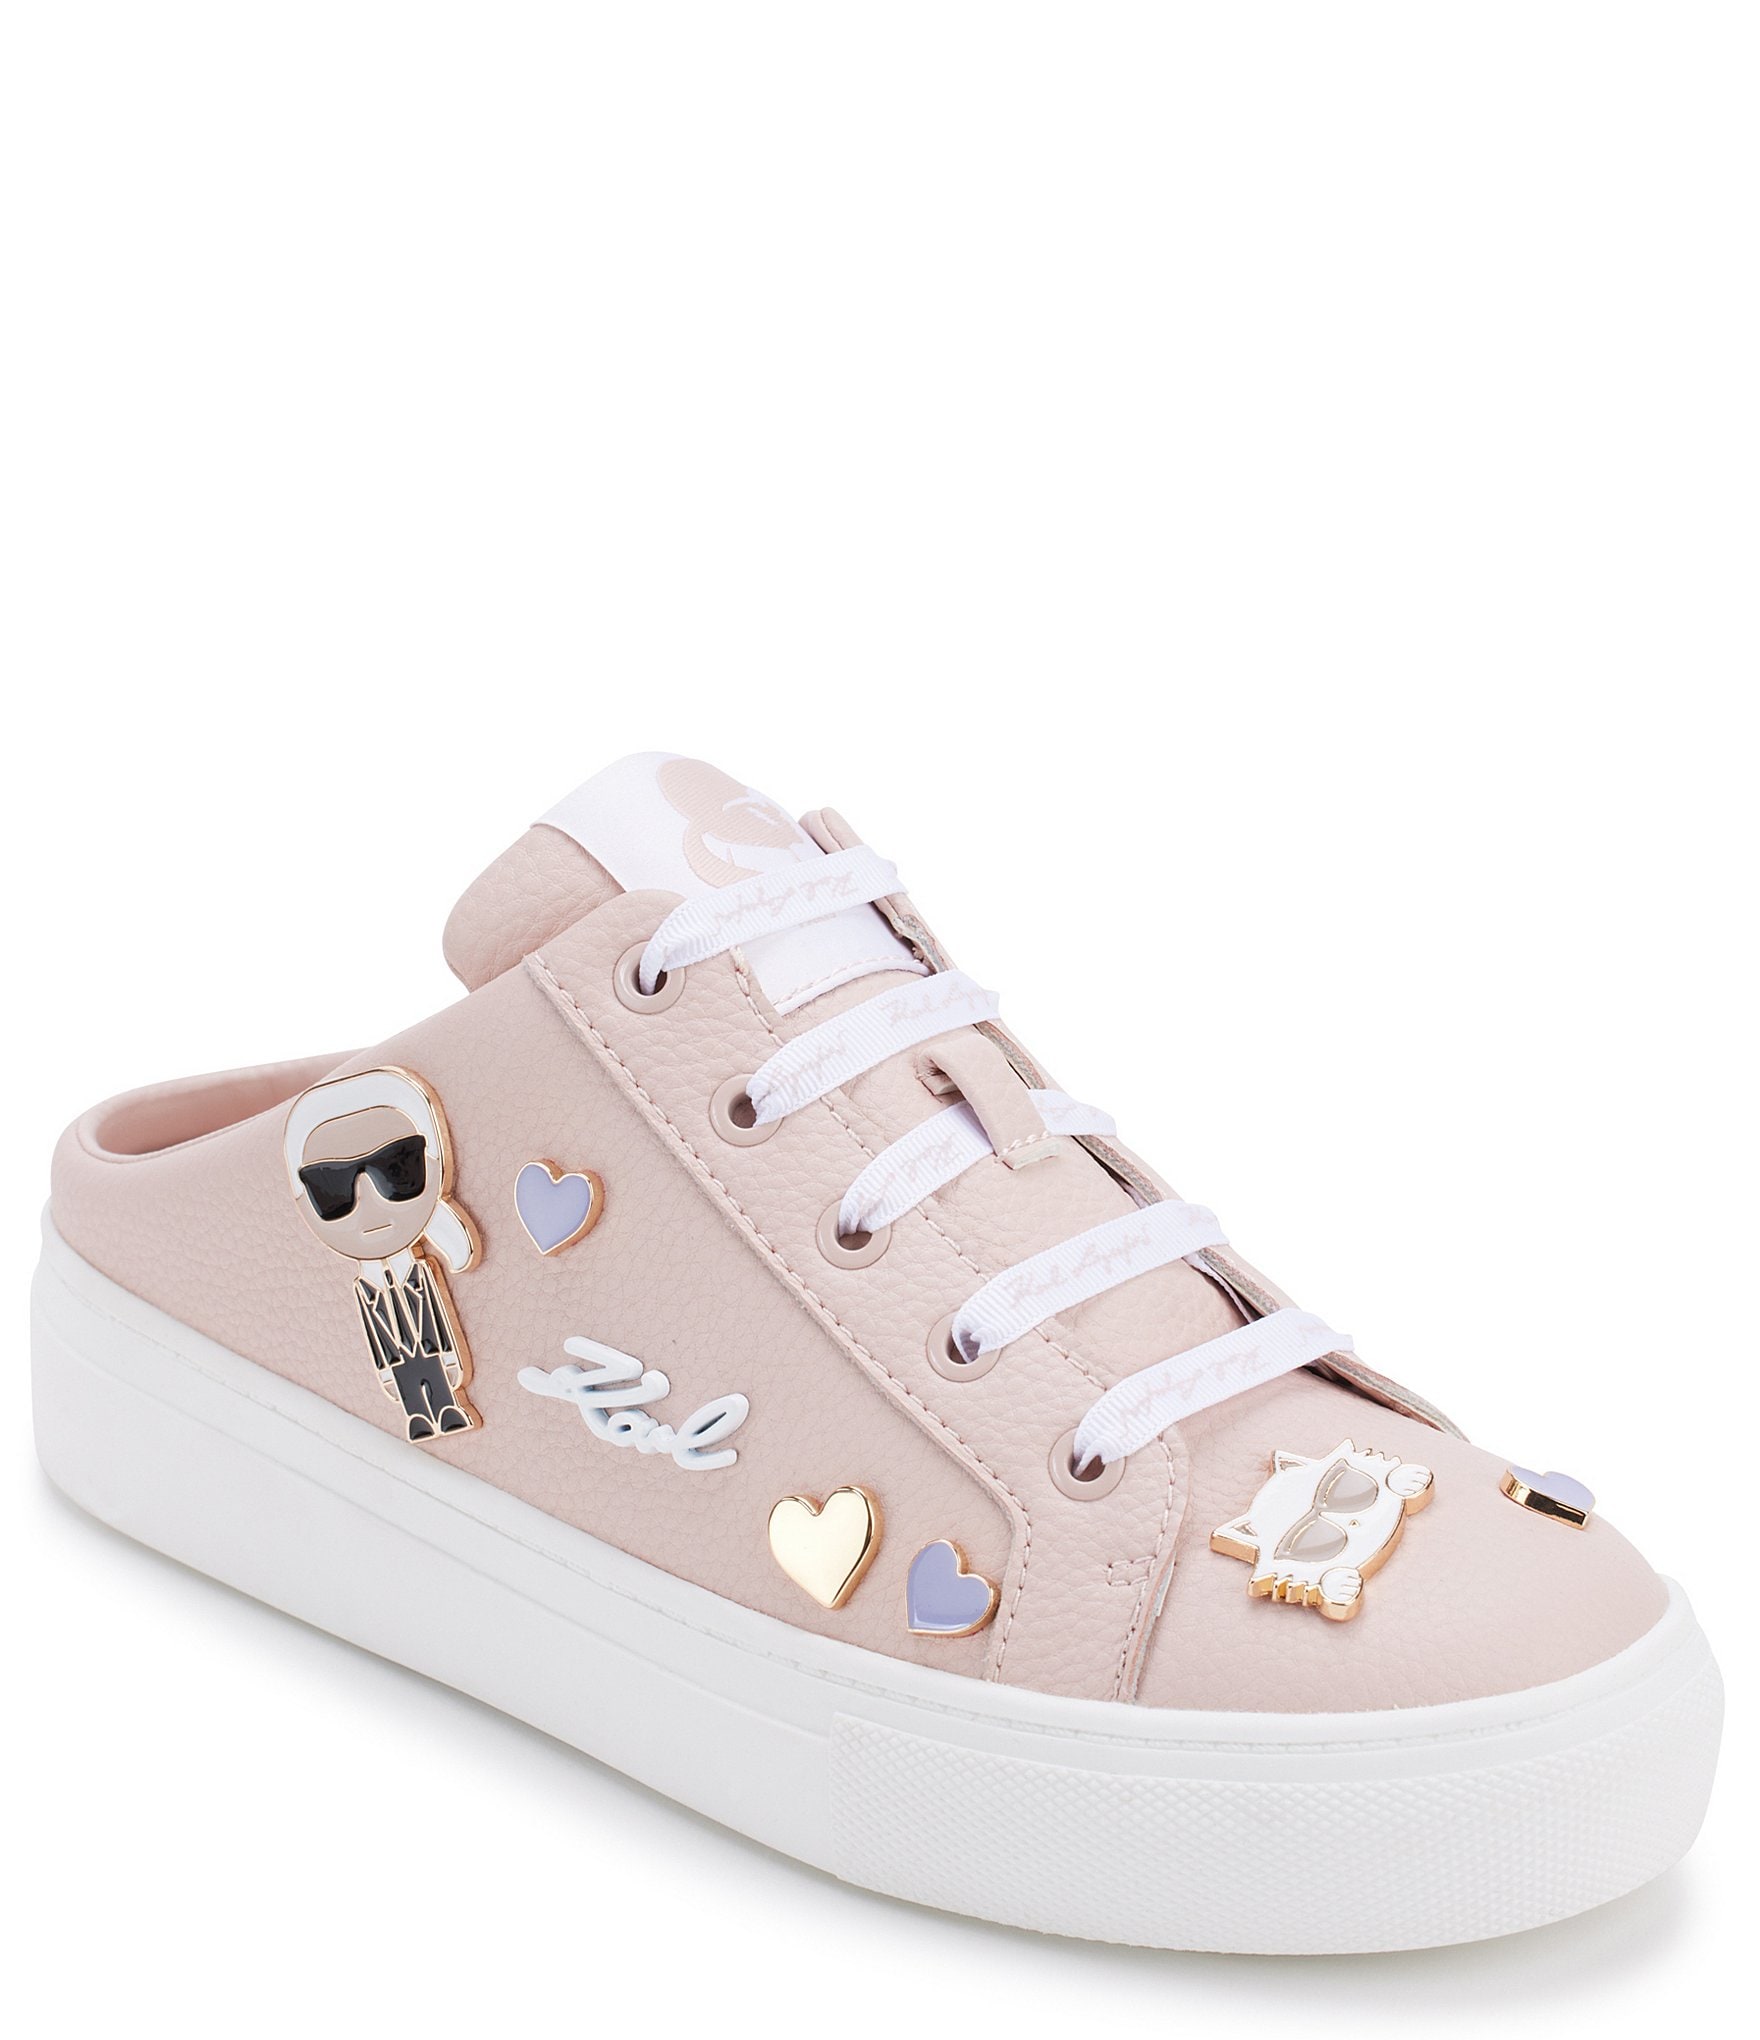 Karl Lagerfeld Paris Cambria Charm Detail Leather Mule Sneakers |